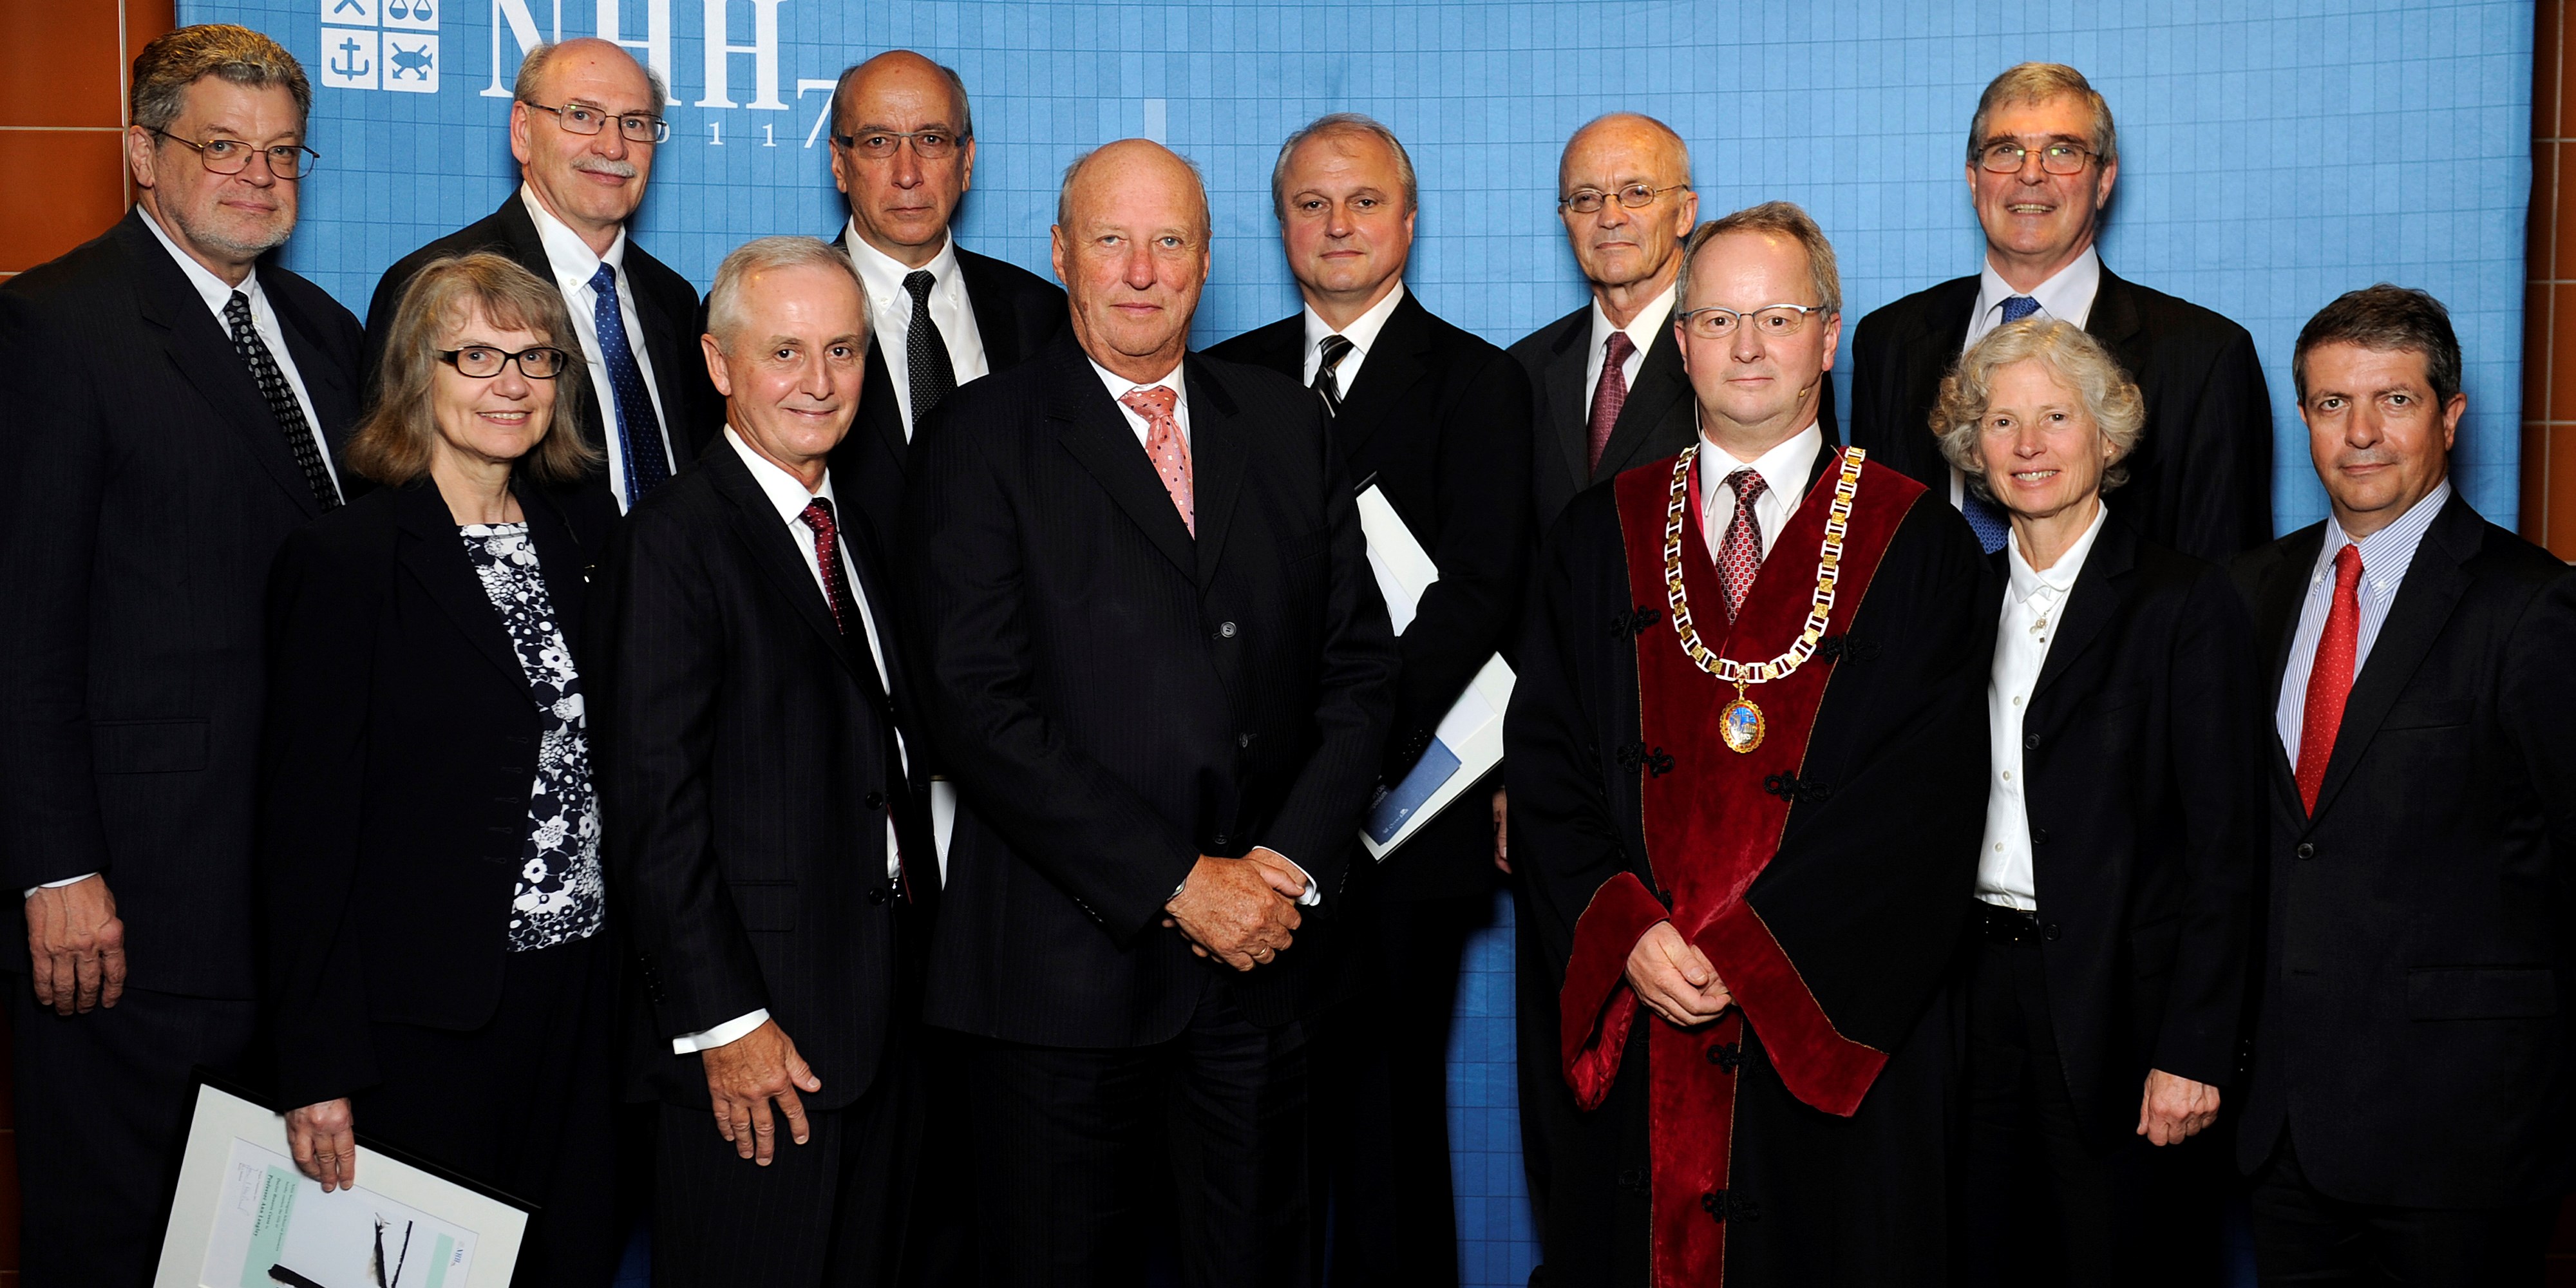 King Harald and former Rector Jan I Haaland with honorary doctors appointed during NHH's 75th anniversary in 2011. Photo: Helge Skodvin